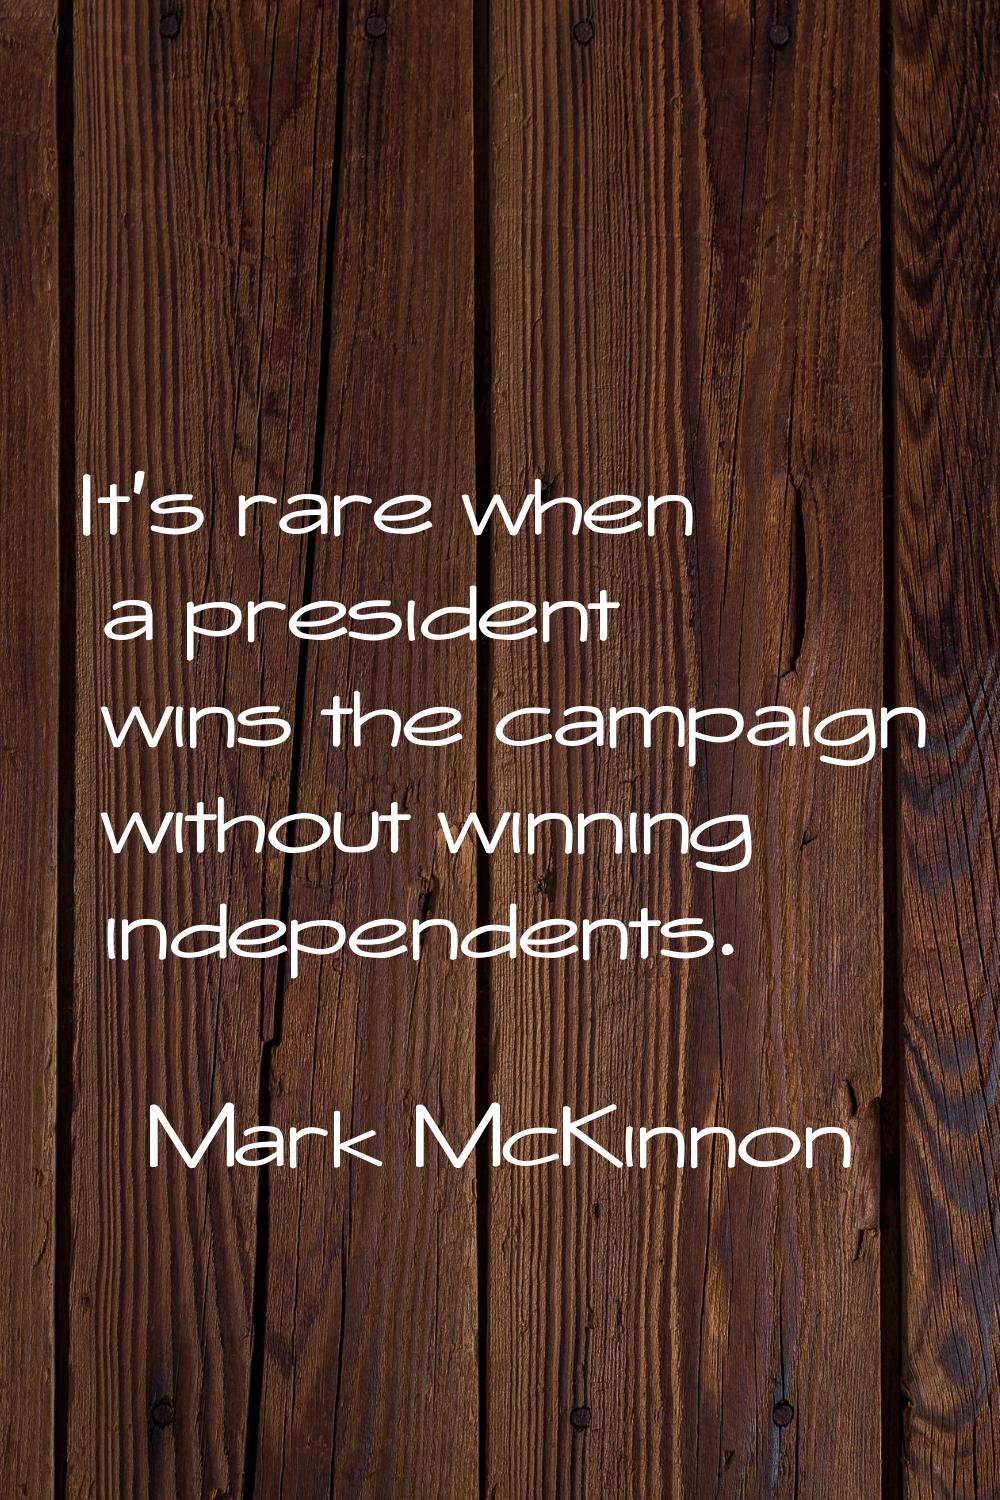 It's rare when a president wins the campaign without winning independents.